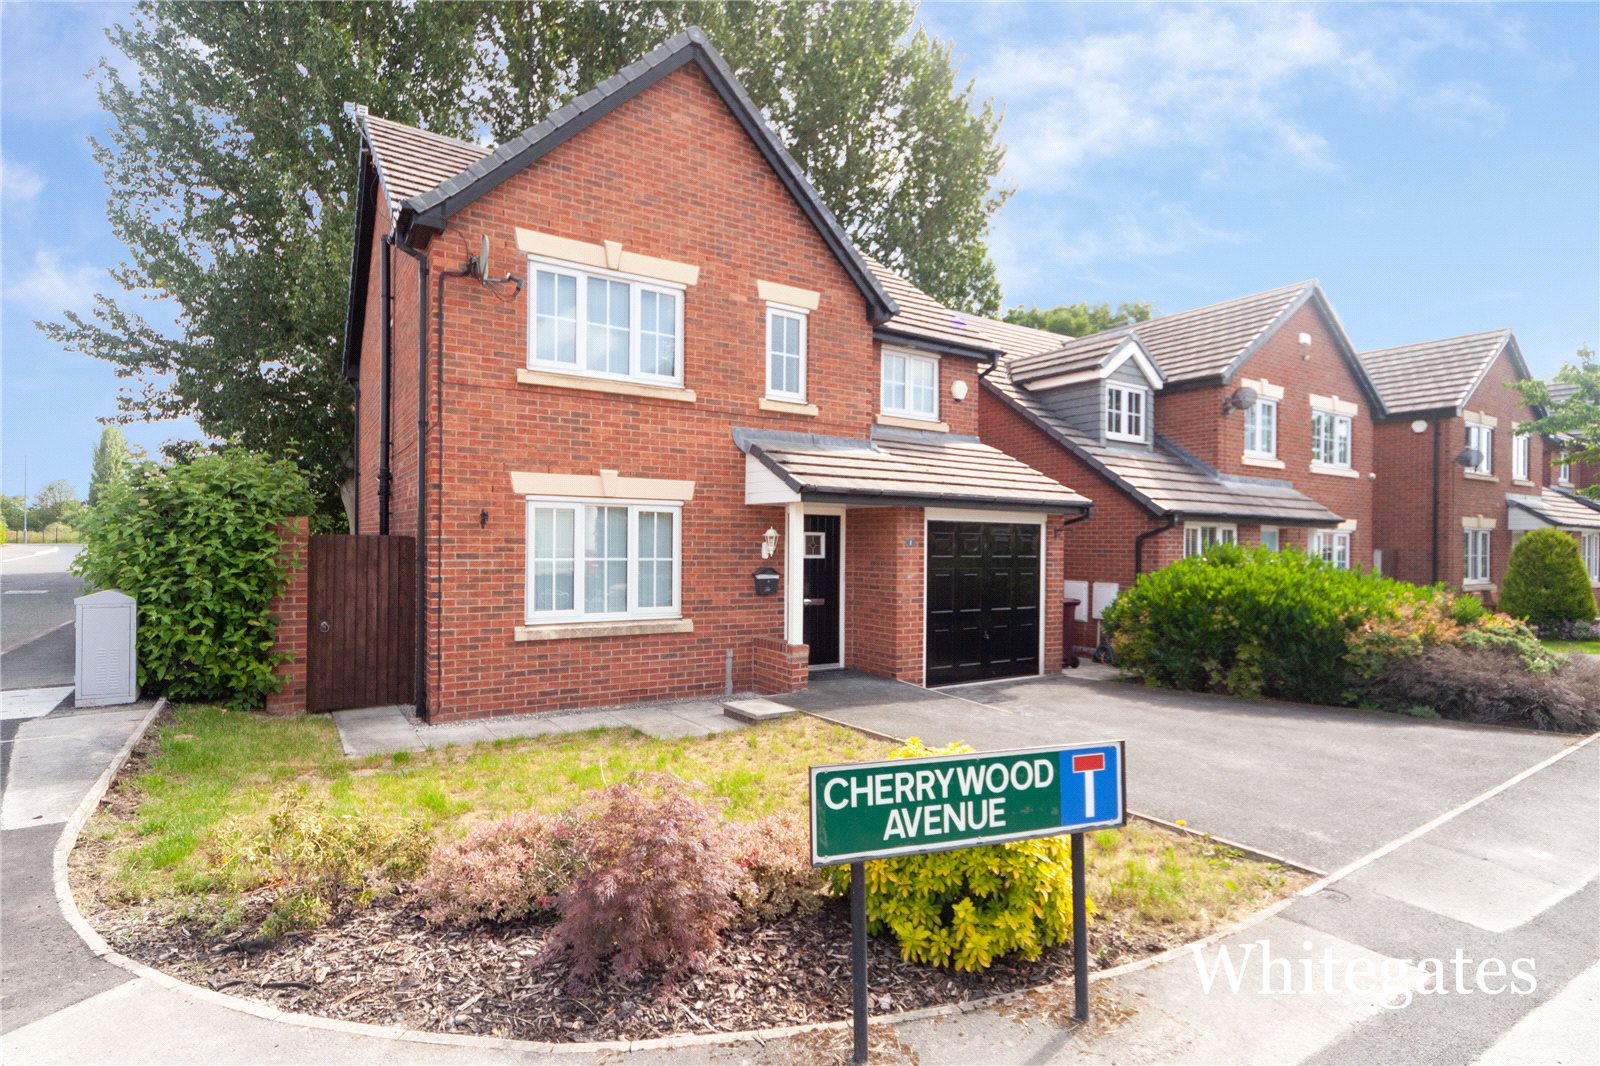 Whitegates Woolton 4 Bedroom House For Sale In Cherrywood Avenue Halewood Liverpool